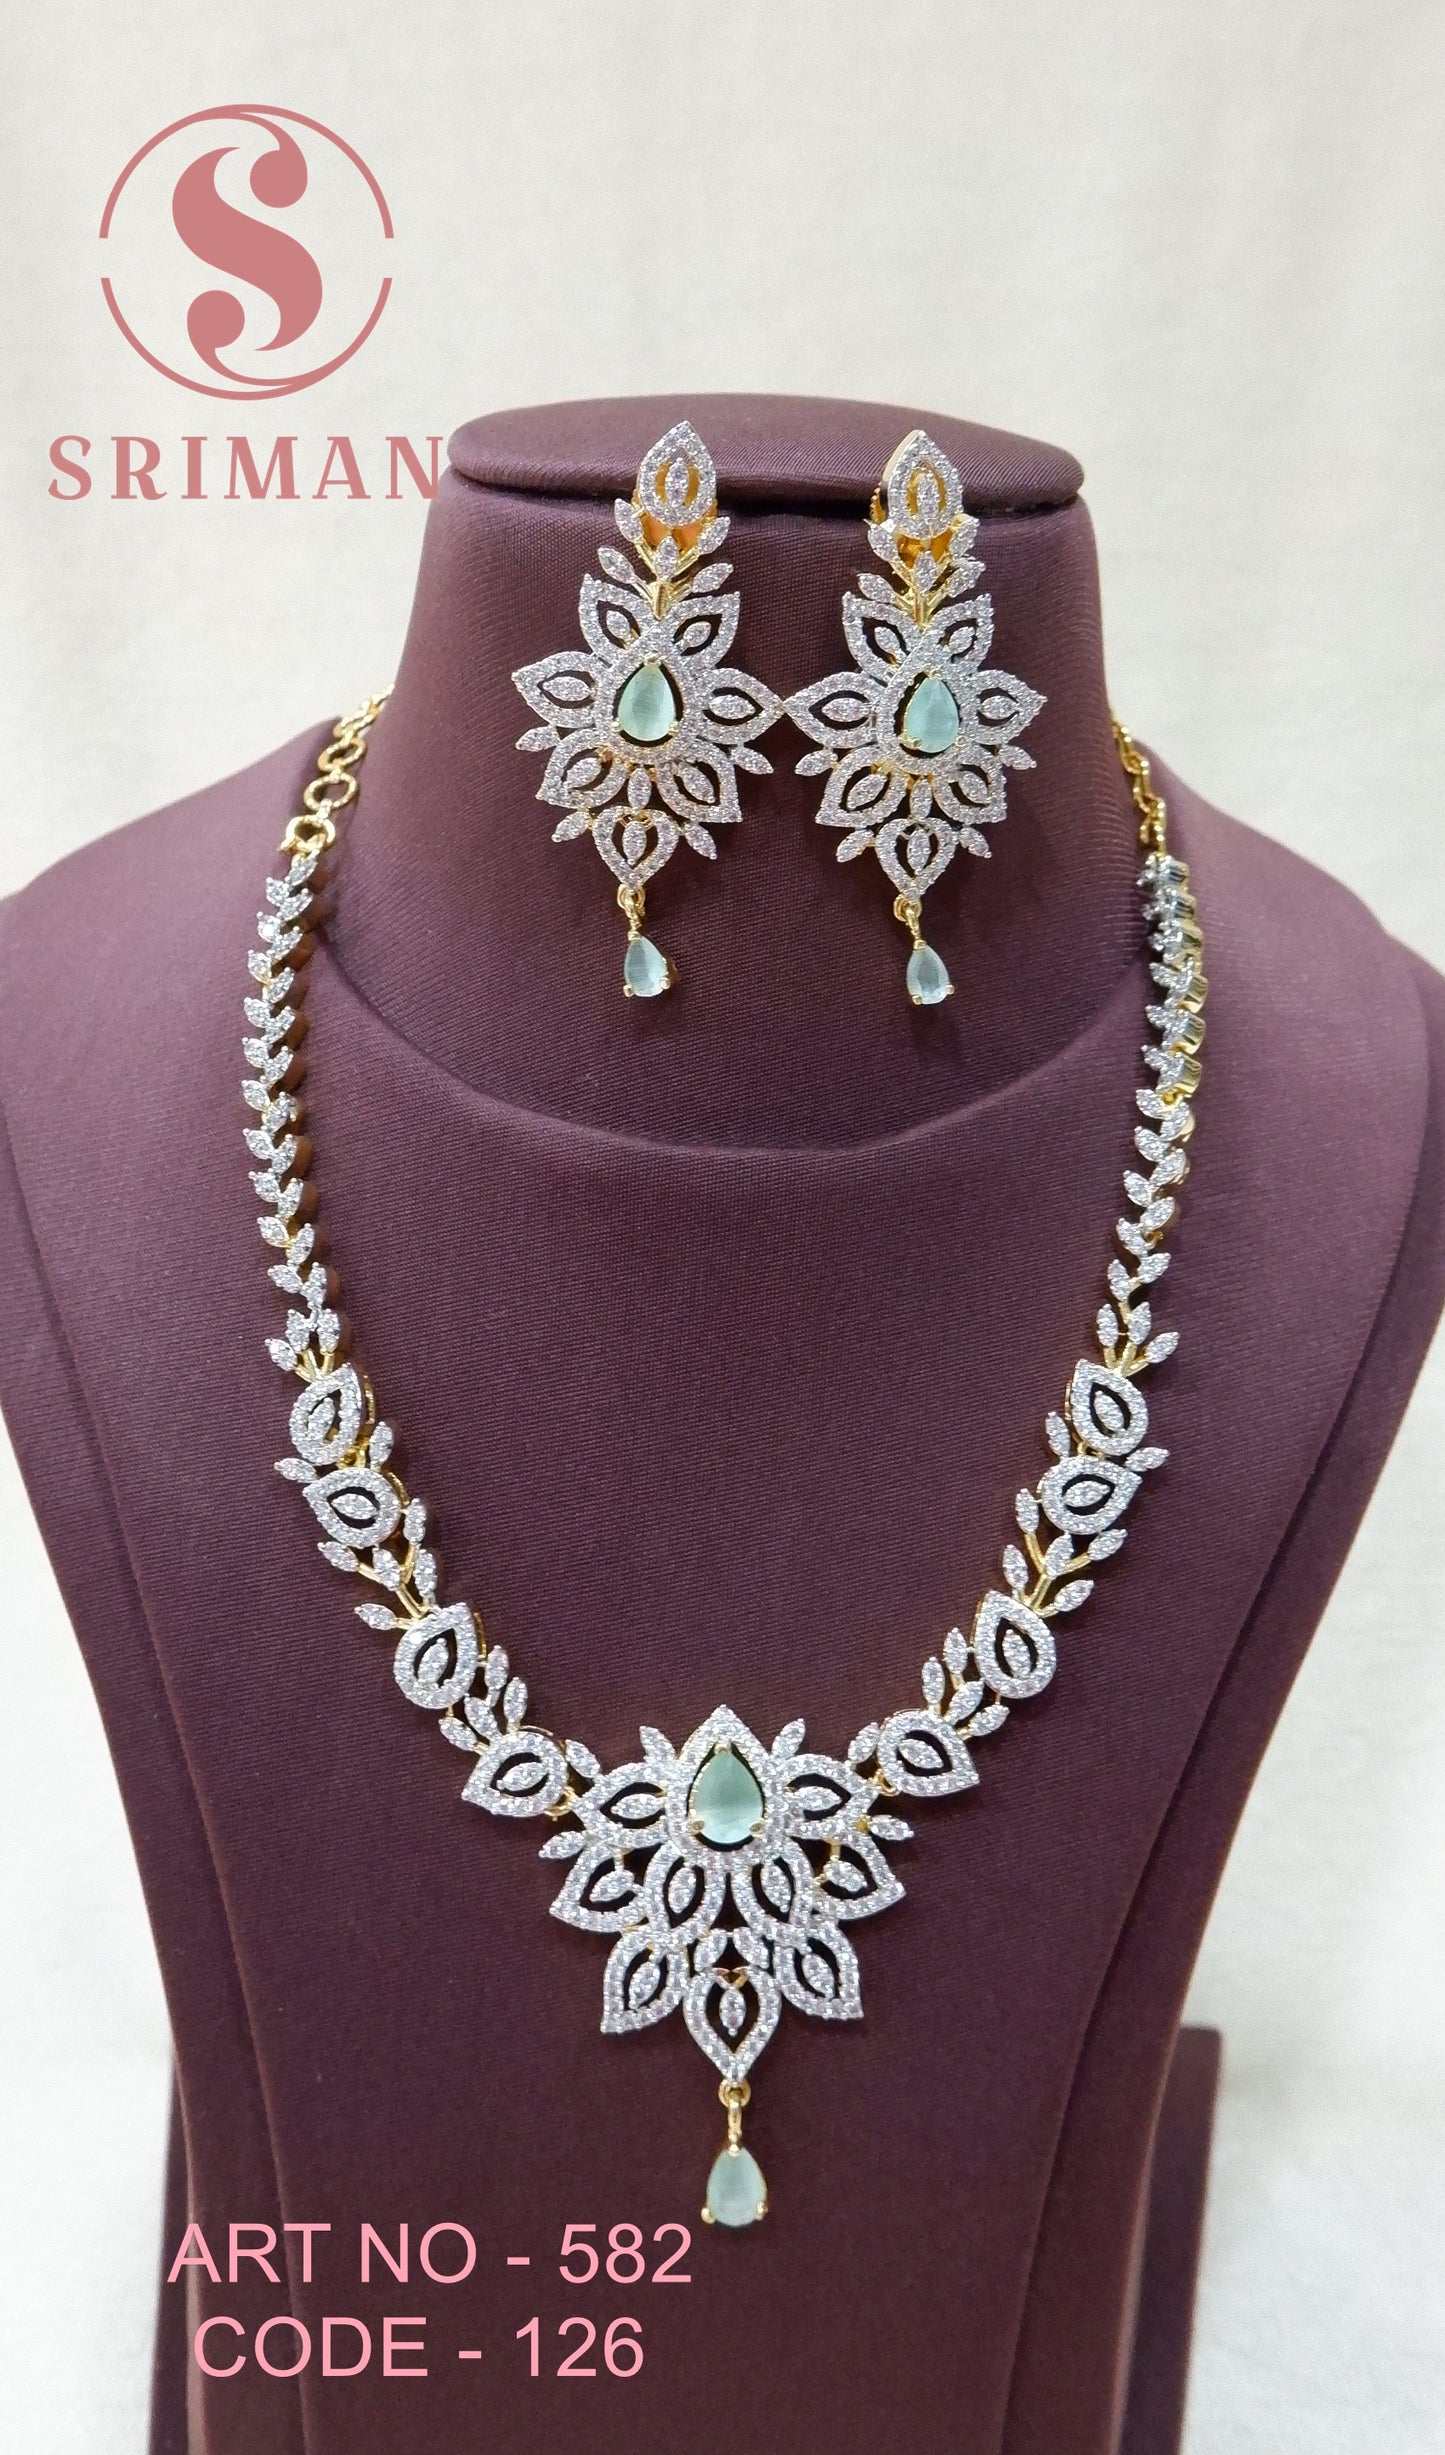 SRIMAN FANCY NECKLACE SET WITH EARINGS